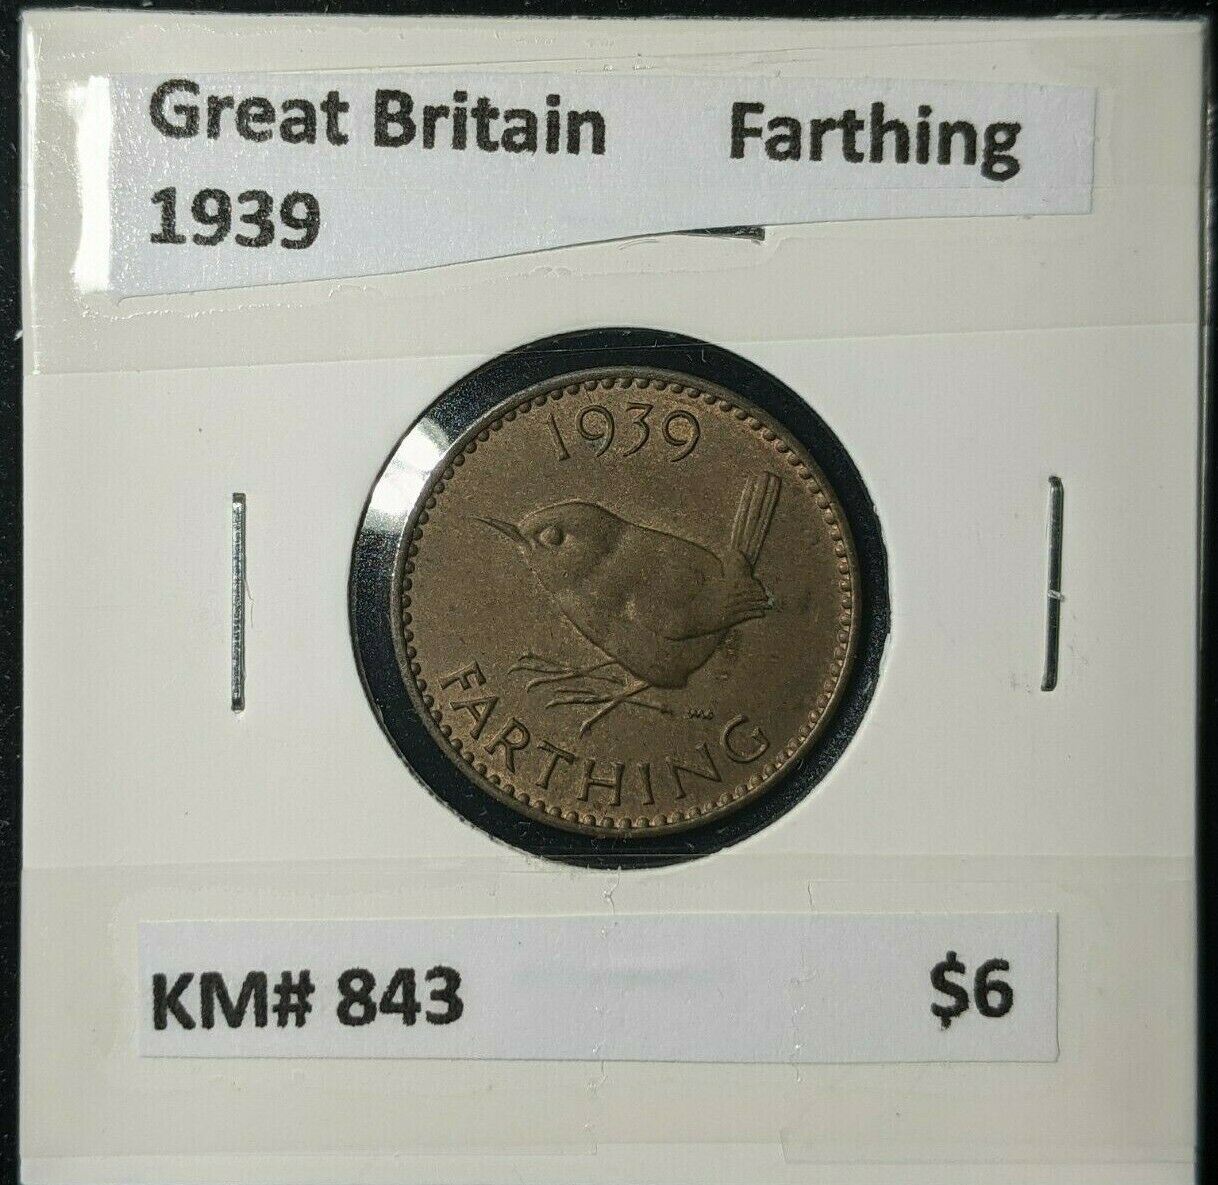 Great Britain 1939 1/4d Farthing KM# 843 #179